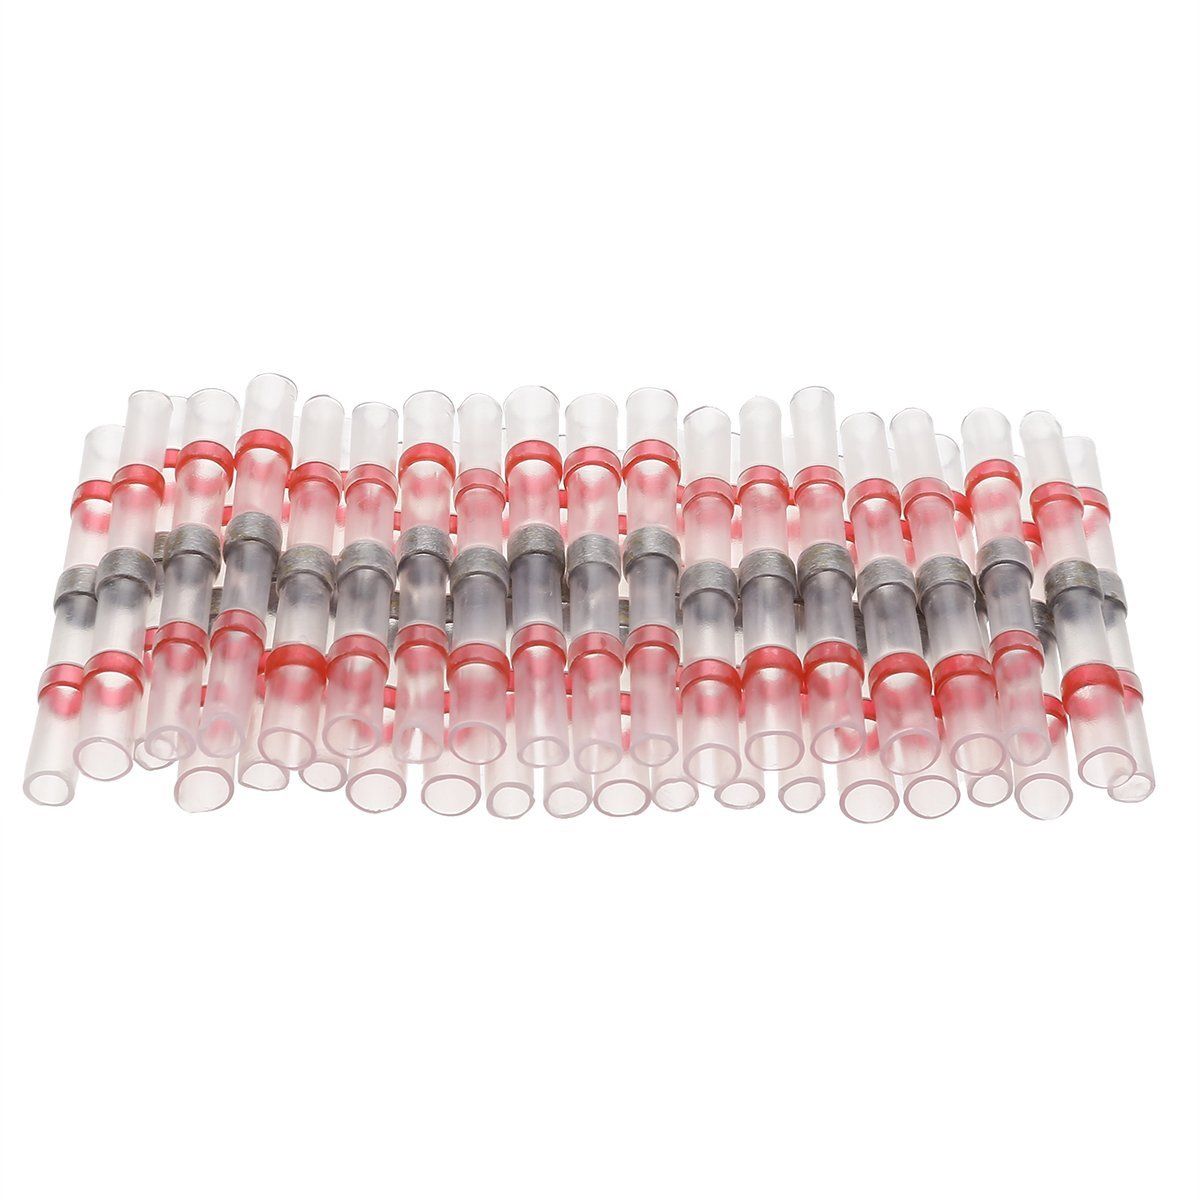 500PCS Waterproof Insulated Solder Seal Sleeve Splice Terminals Heat Shrink Electrical Wire Butt Connectors 22-18AWG Kit